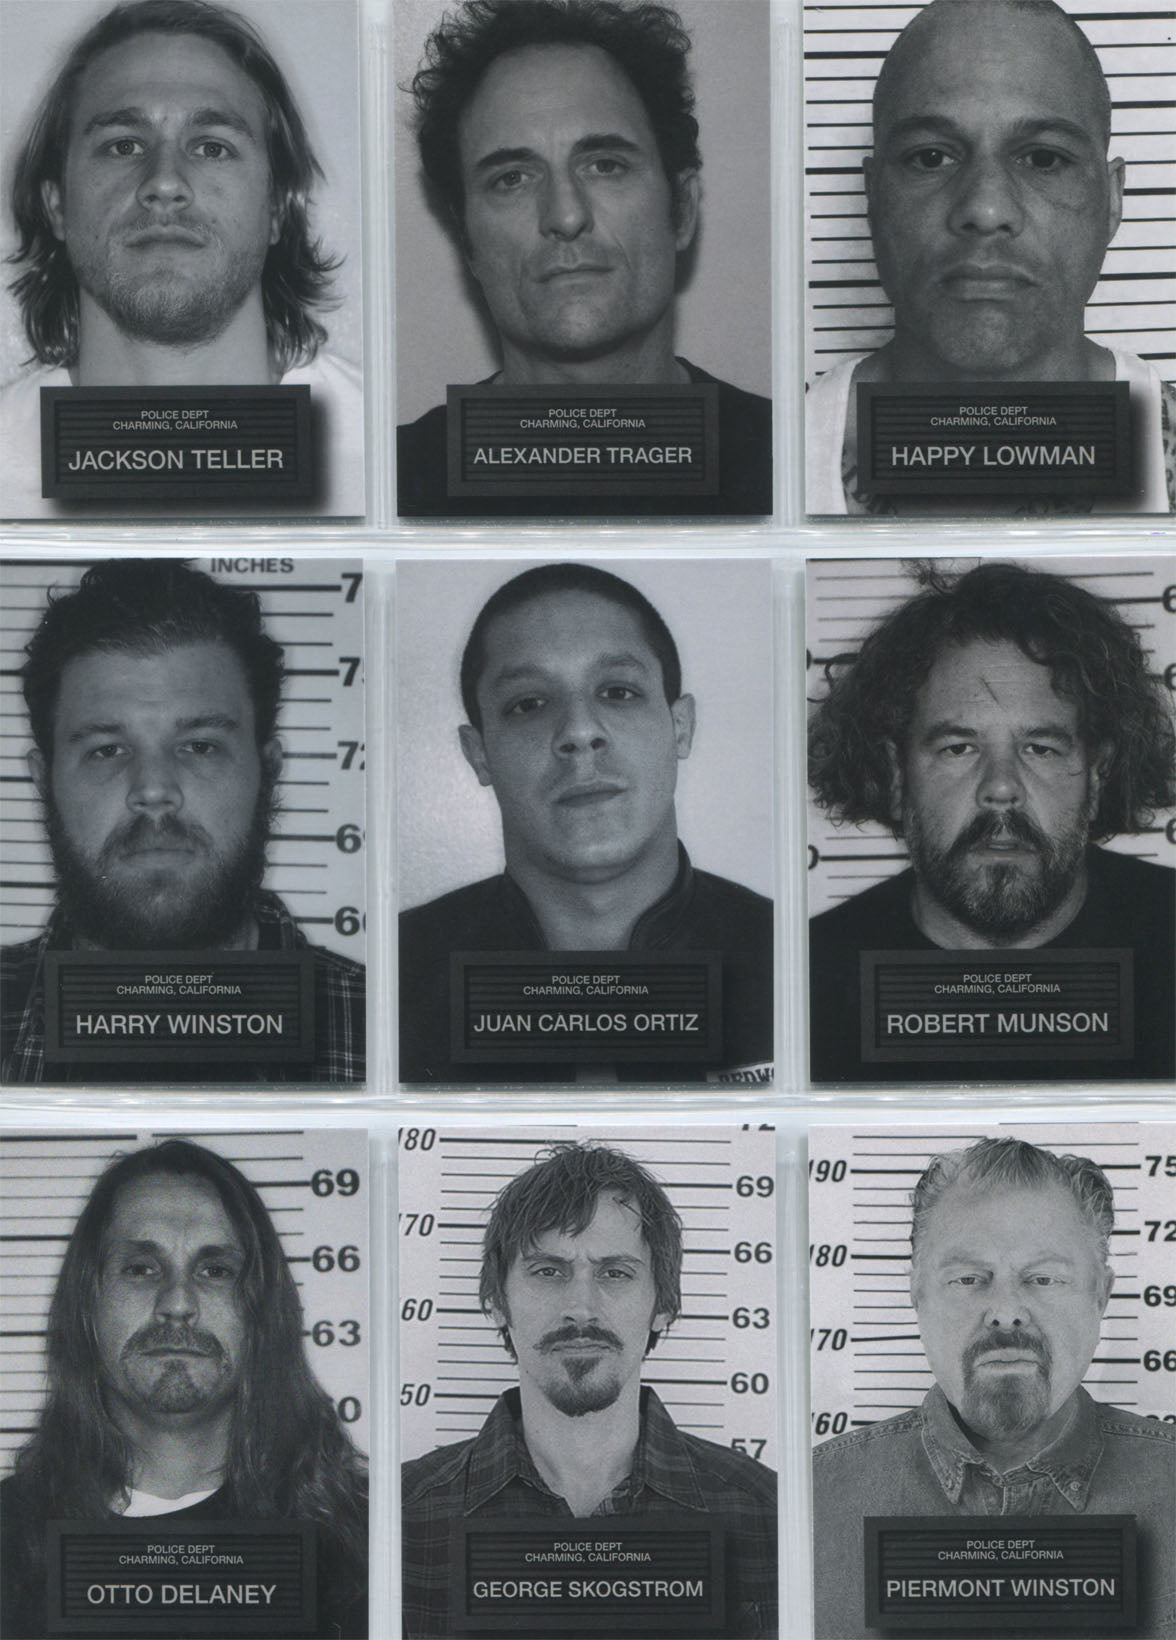 Sons of Anarchy Seasons 6 & 7 Mugshots Complete 9 Chase Card Set